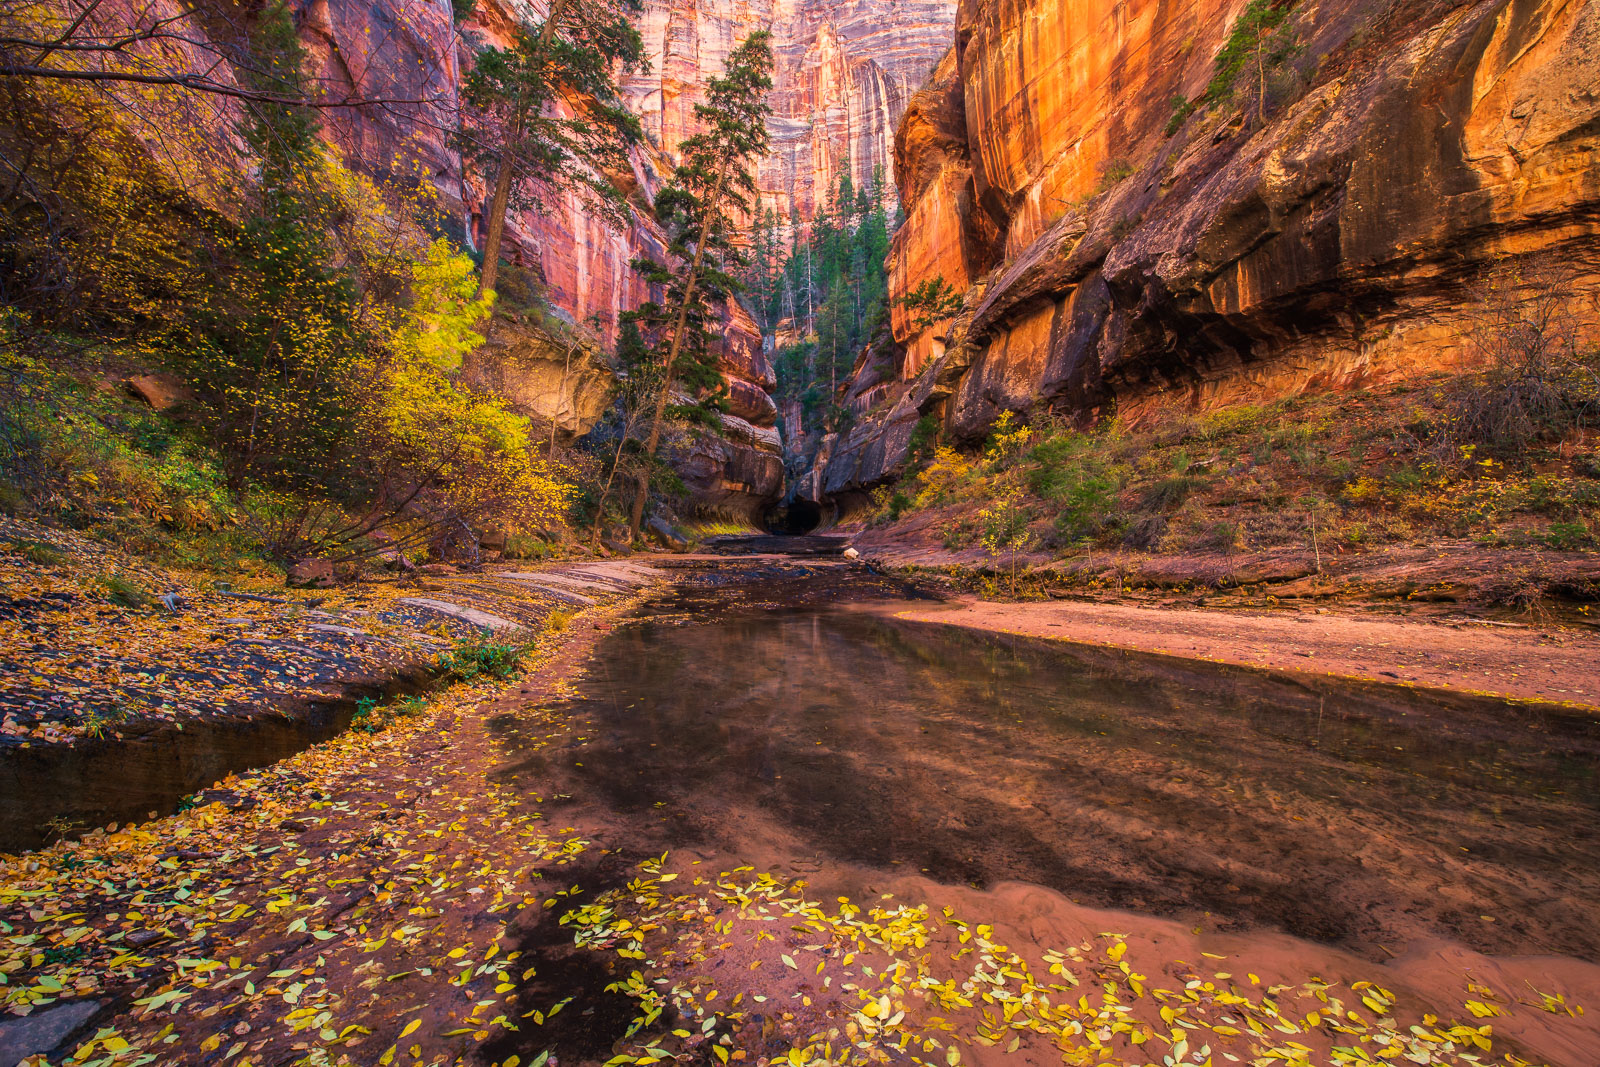 Autumn color in Left Fork of North Creek (The Subway), Zion National Park, Utah.